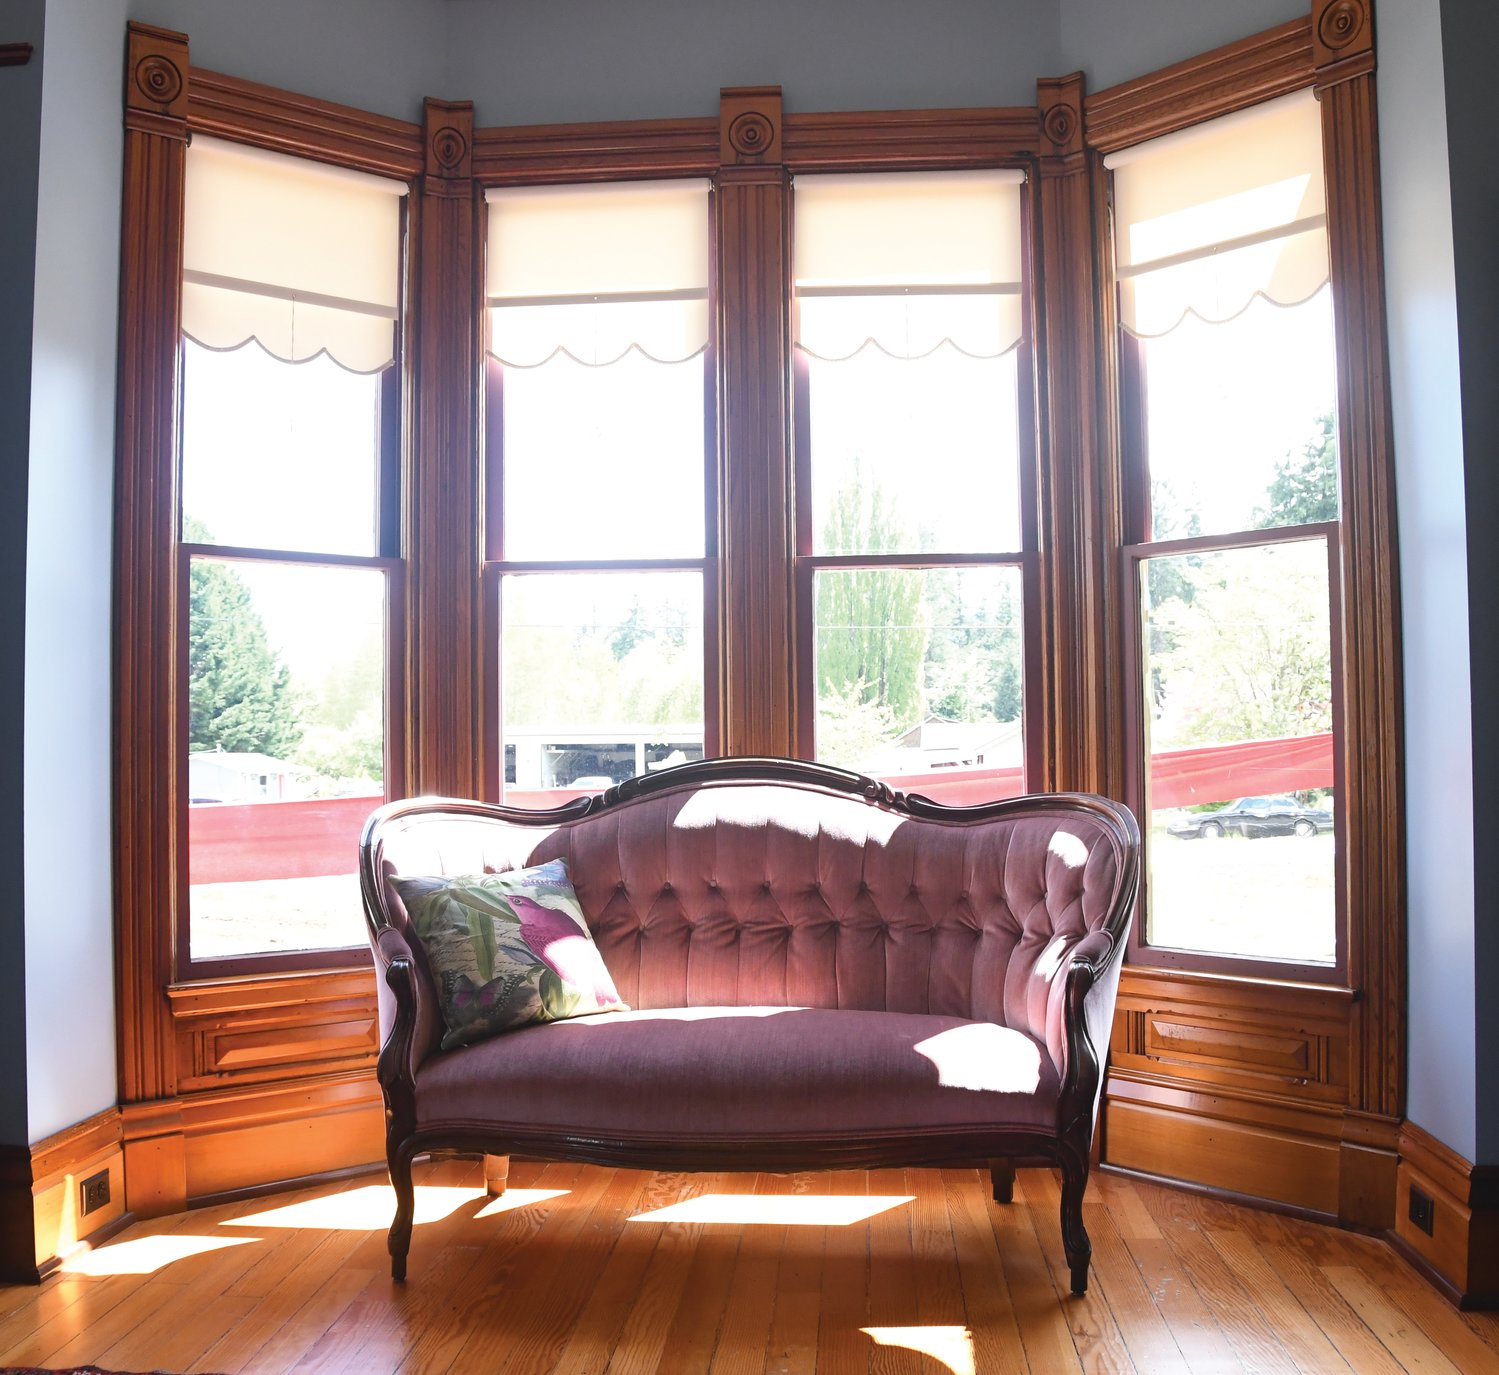 A plethora of Victorian-era furniture adorns the 17 rooms within the Worthington Mansion in Quilcene.